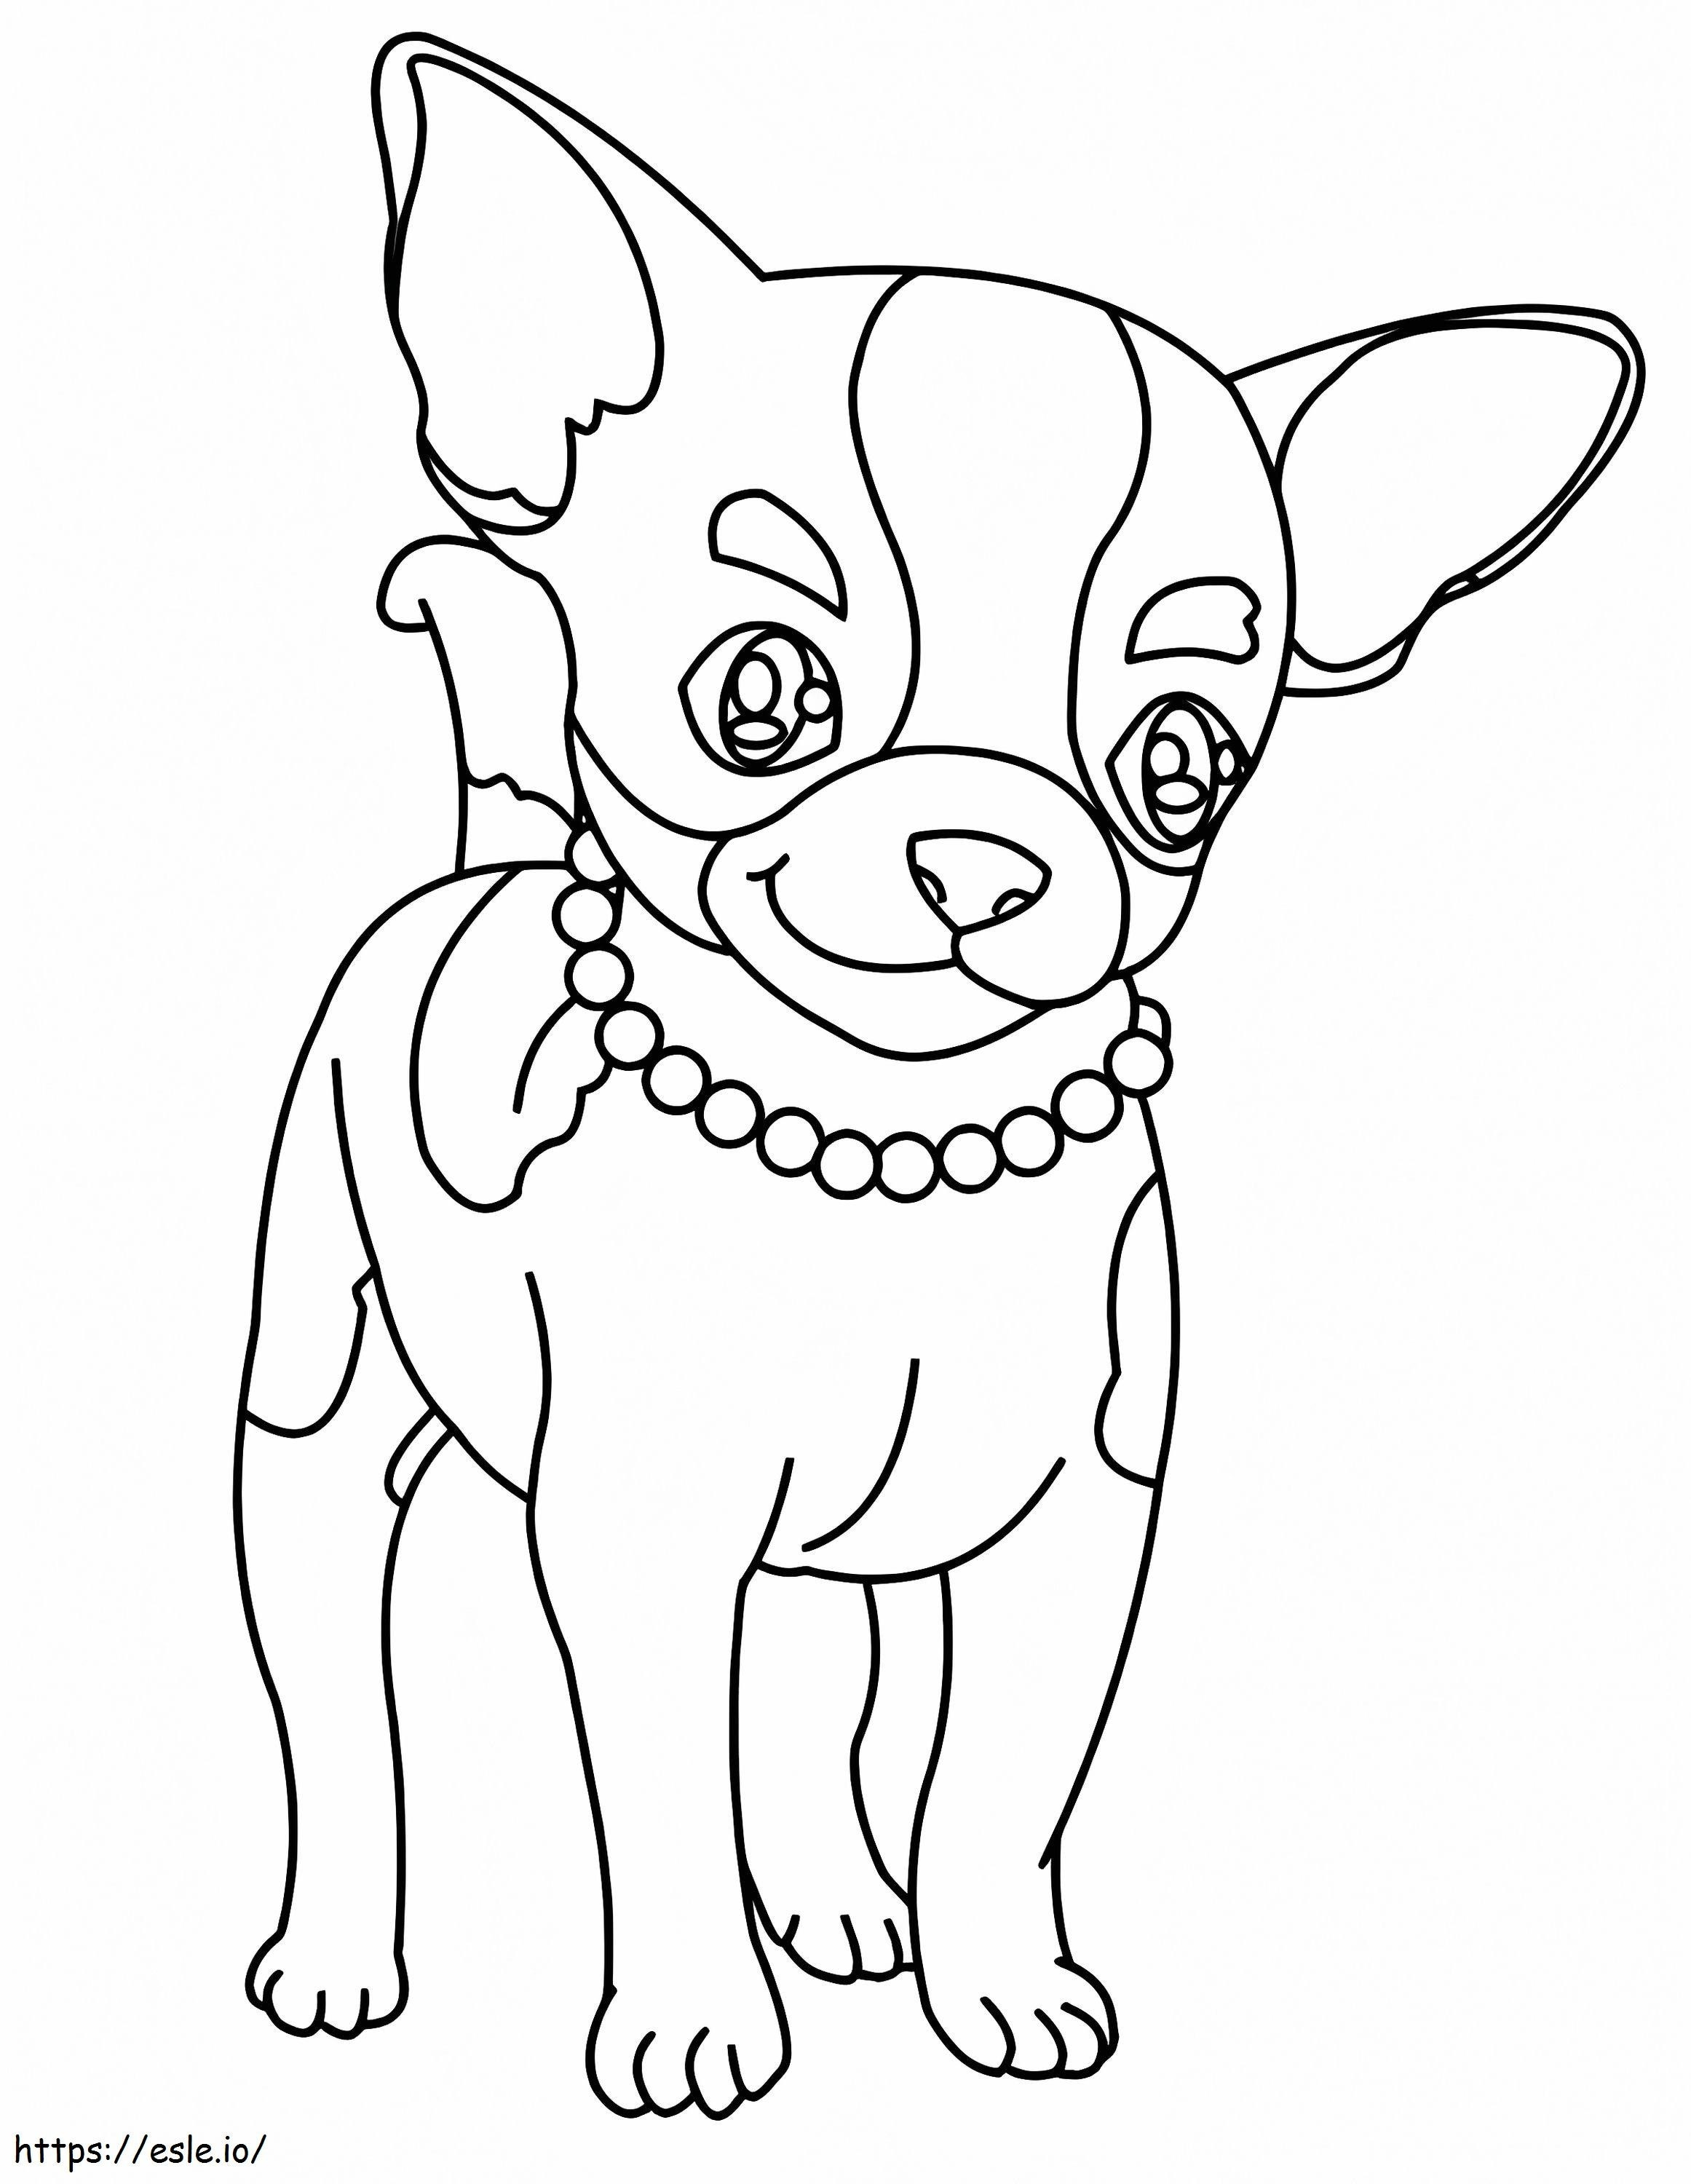 Lovely Chihuahua coloring page